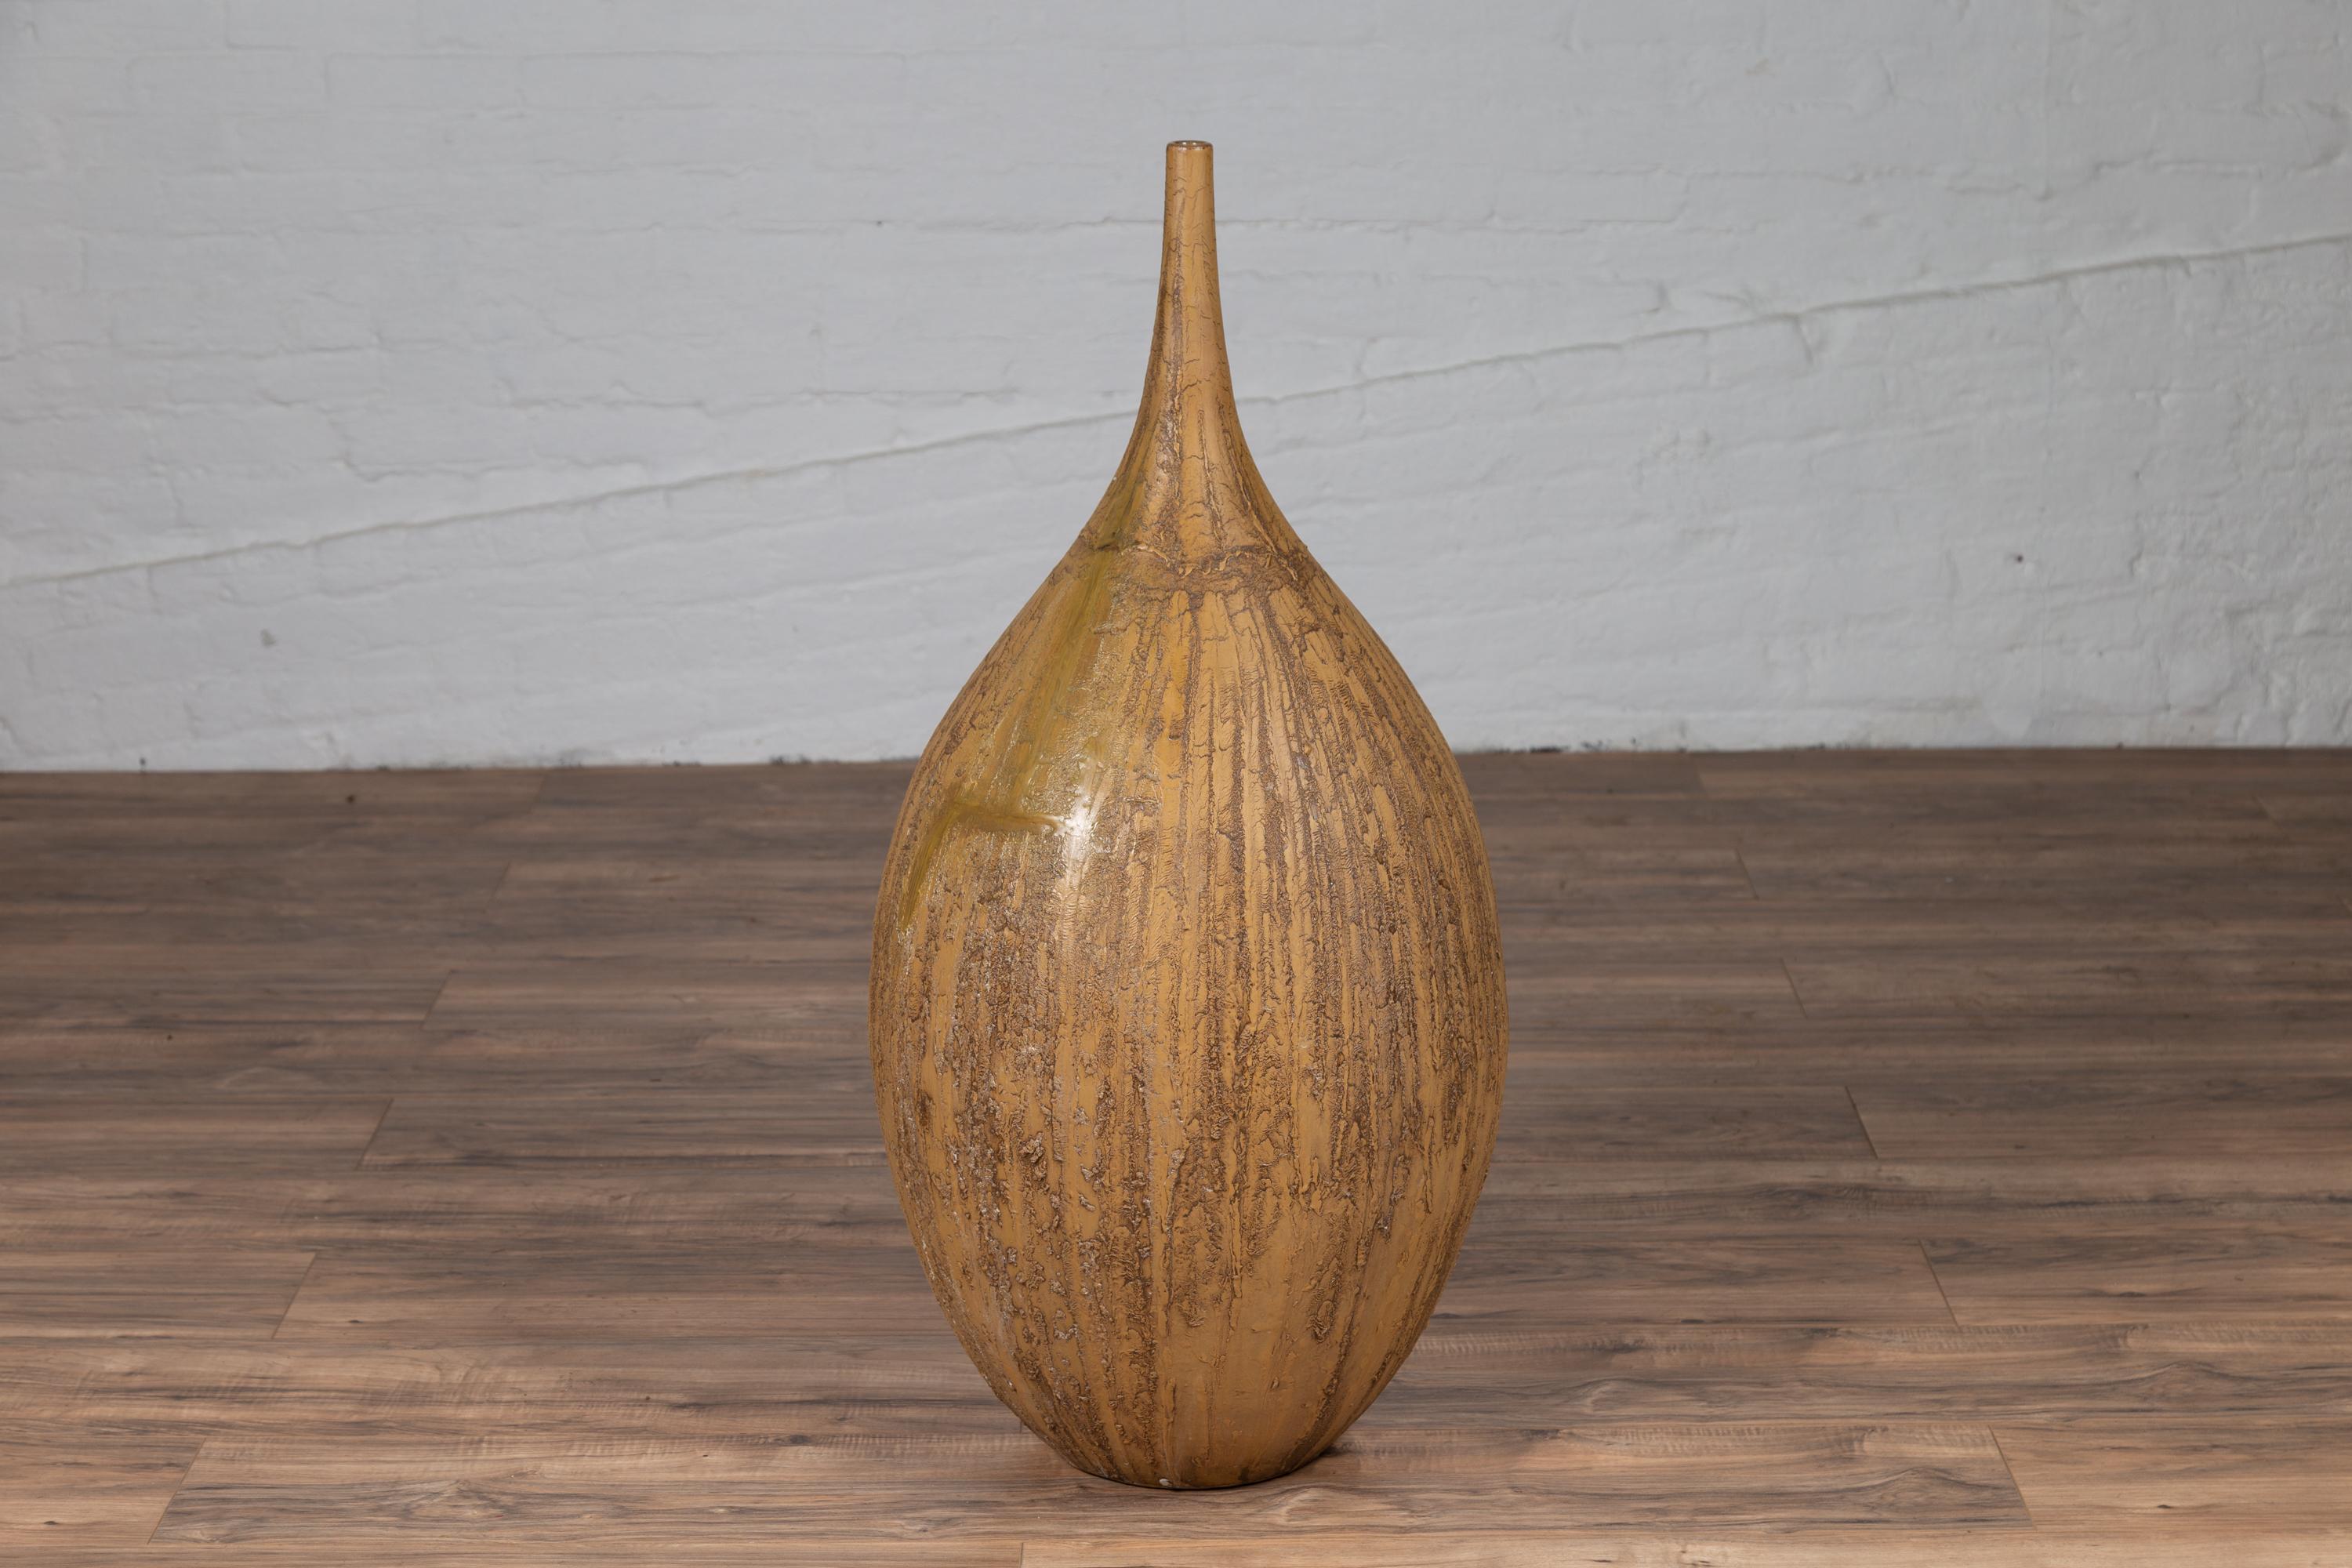 A contemporary Thai handmade ceramic vase with tapered spout and mustard glaze. Found in Chiang Mai, northern Thailand, this elegant contemporary handmade ceramic vase features a 'mustard' glaze beautifully enlivened by textured accents. Topped with